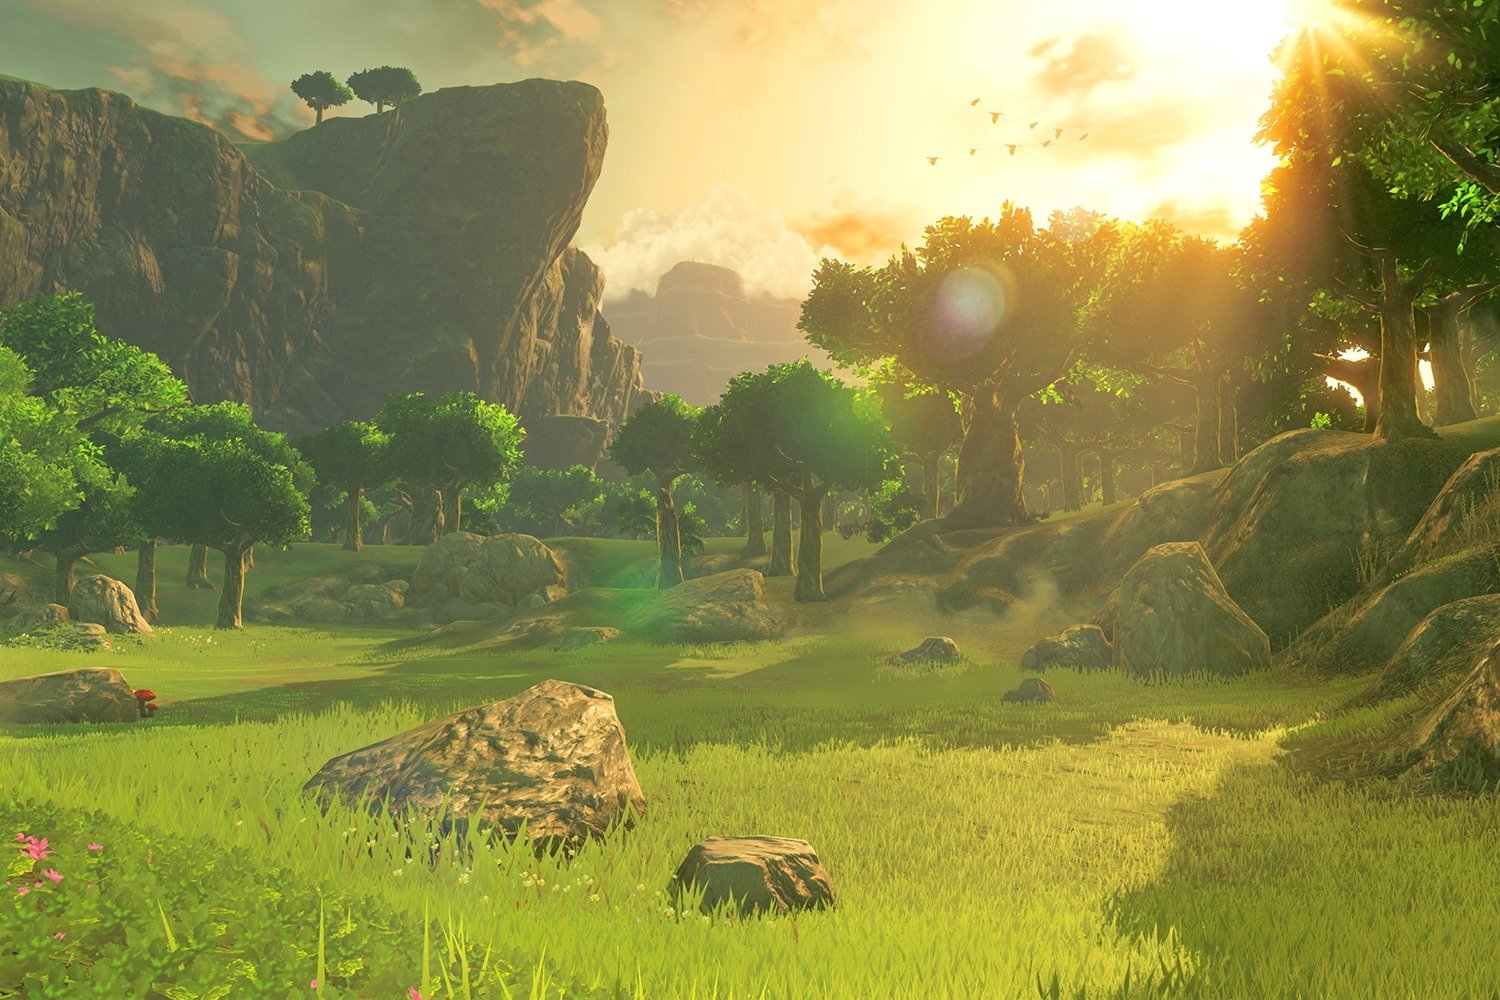 Breath of the Wild placement in Zelda Timeline